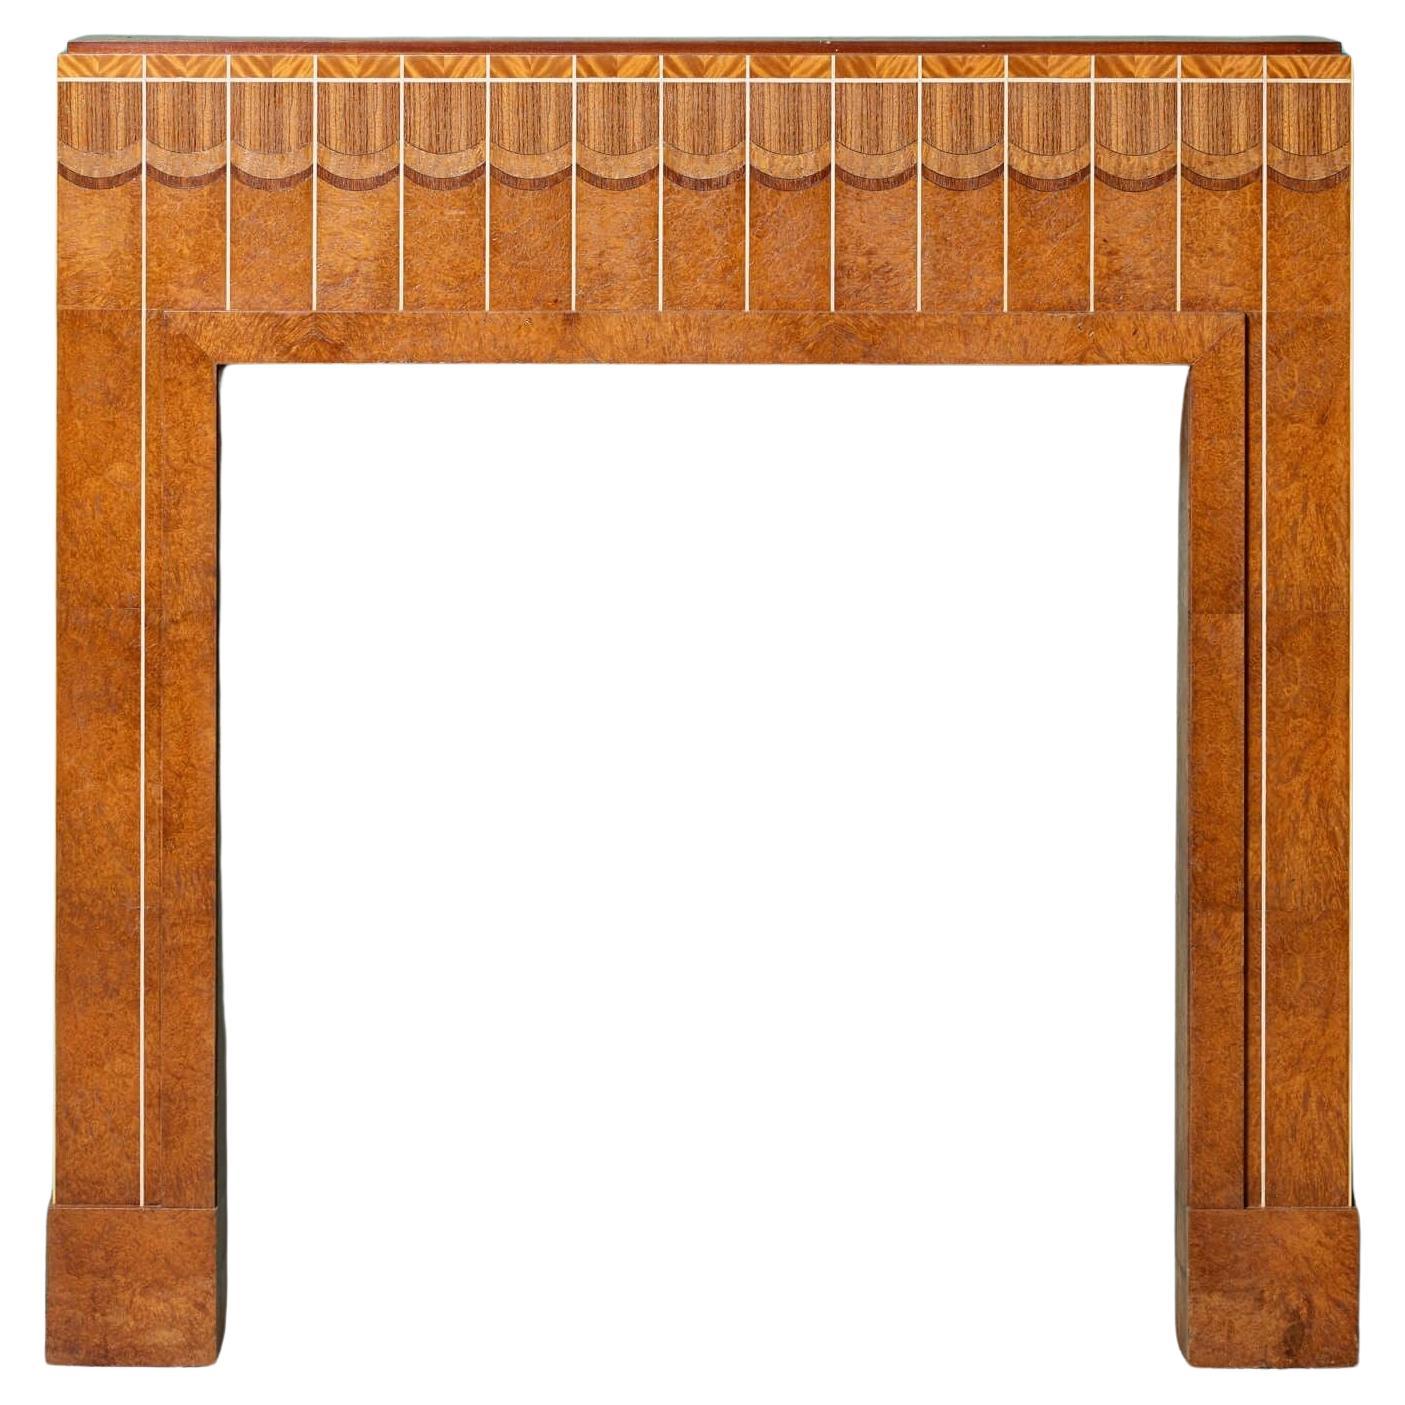 Bakelite Fireplaces and Mantels